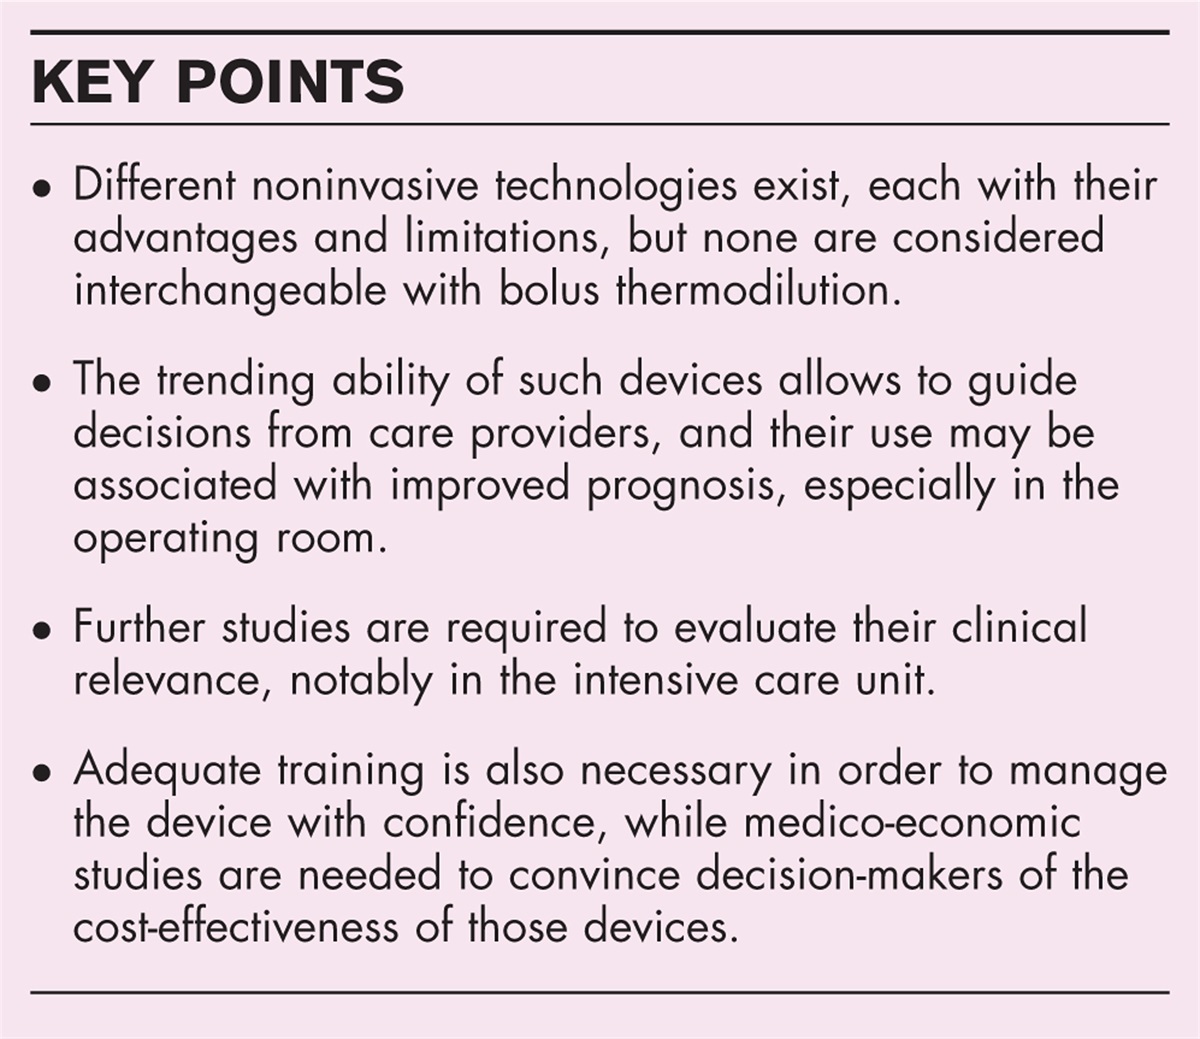 Advantages and limitations of noninvasive devices for cardiac output monitoring: a literature review